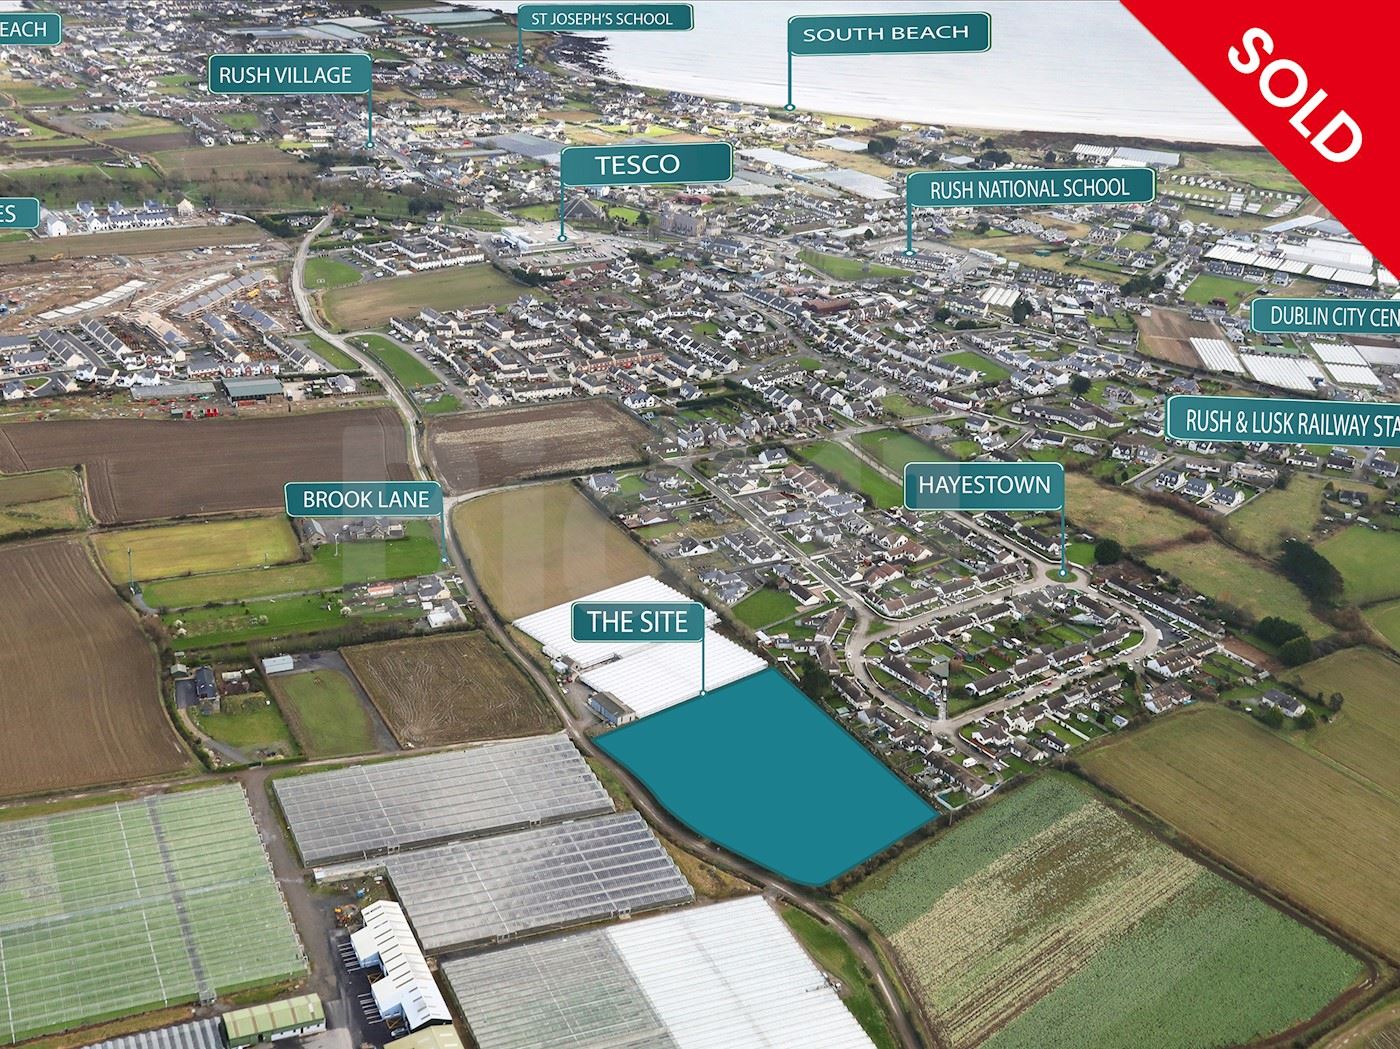 3.2 Acres in Rush - Resi Site with FPP, Hayestown, Co. Dublin 1/6